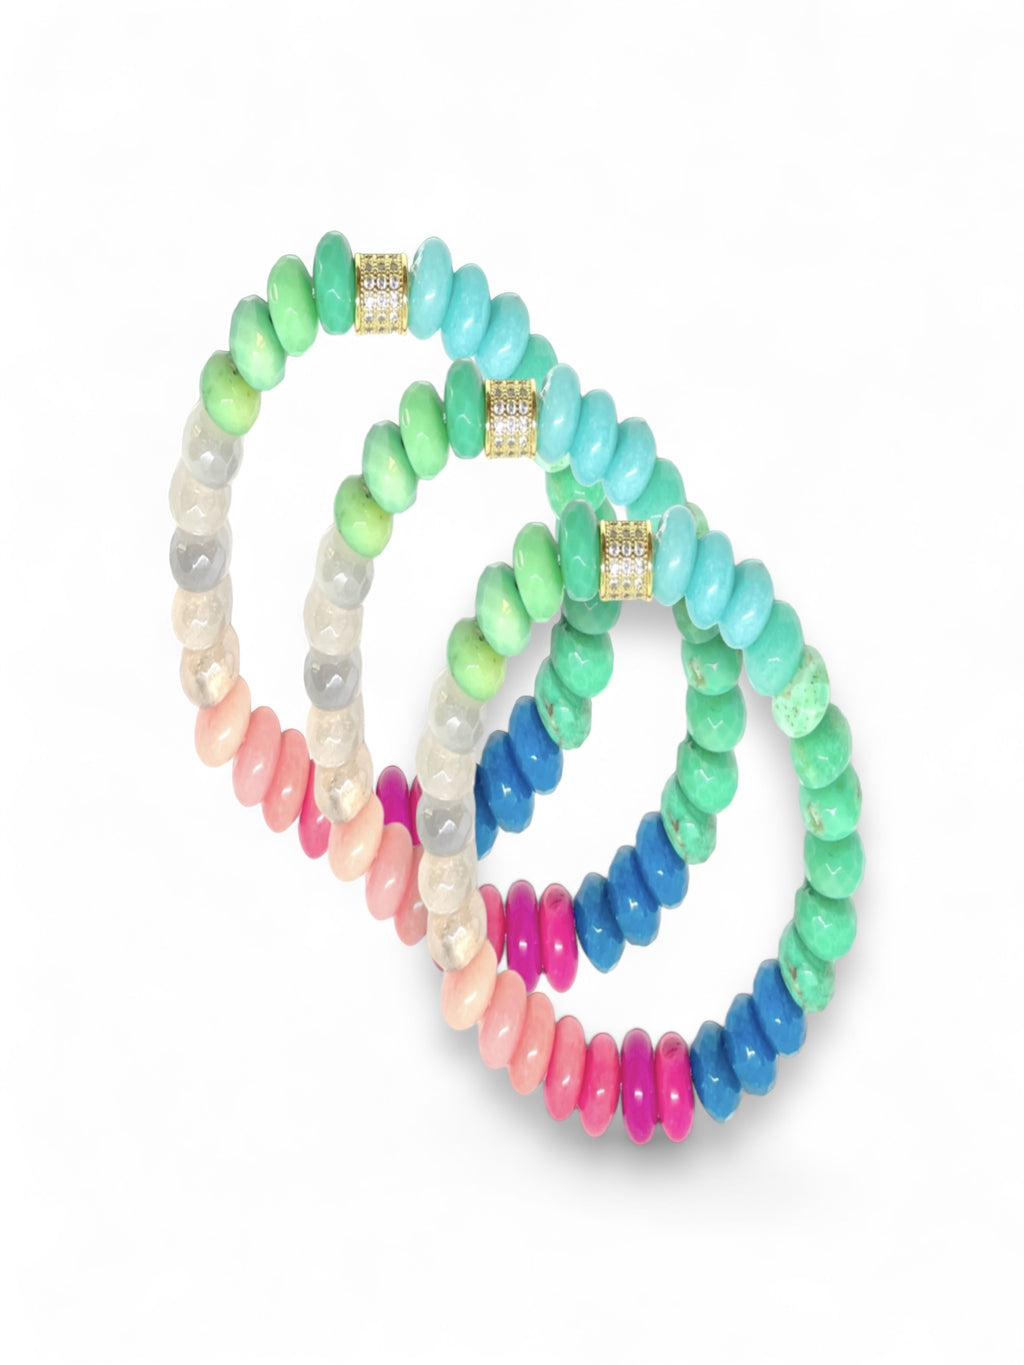 The Charlie Mimosa Bracelet has vibrant multi color gemstones in hues of green, blue, pink, peach, white and grey tones.